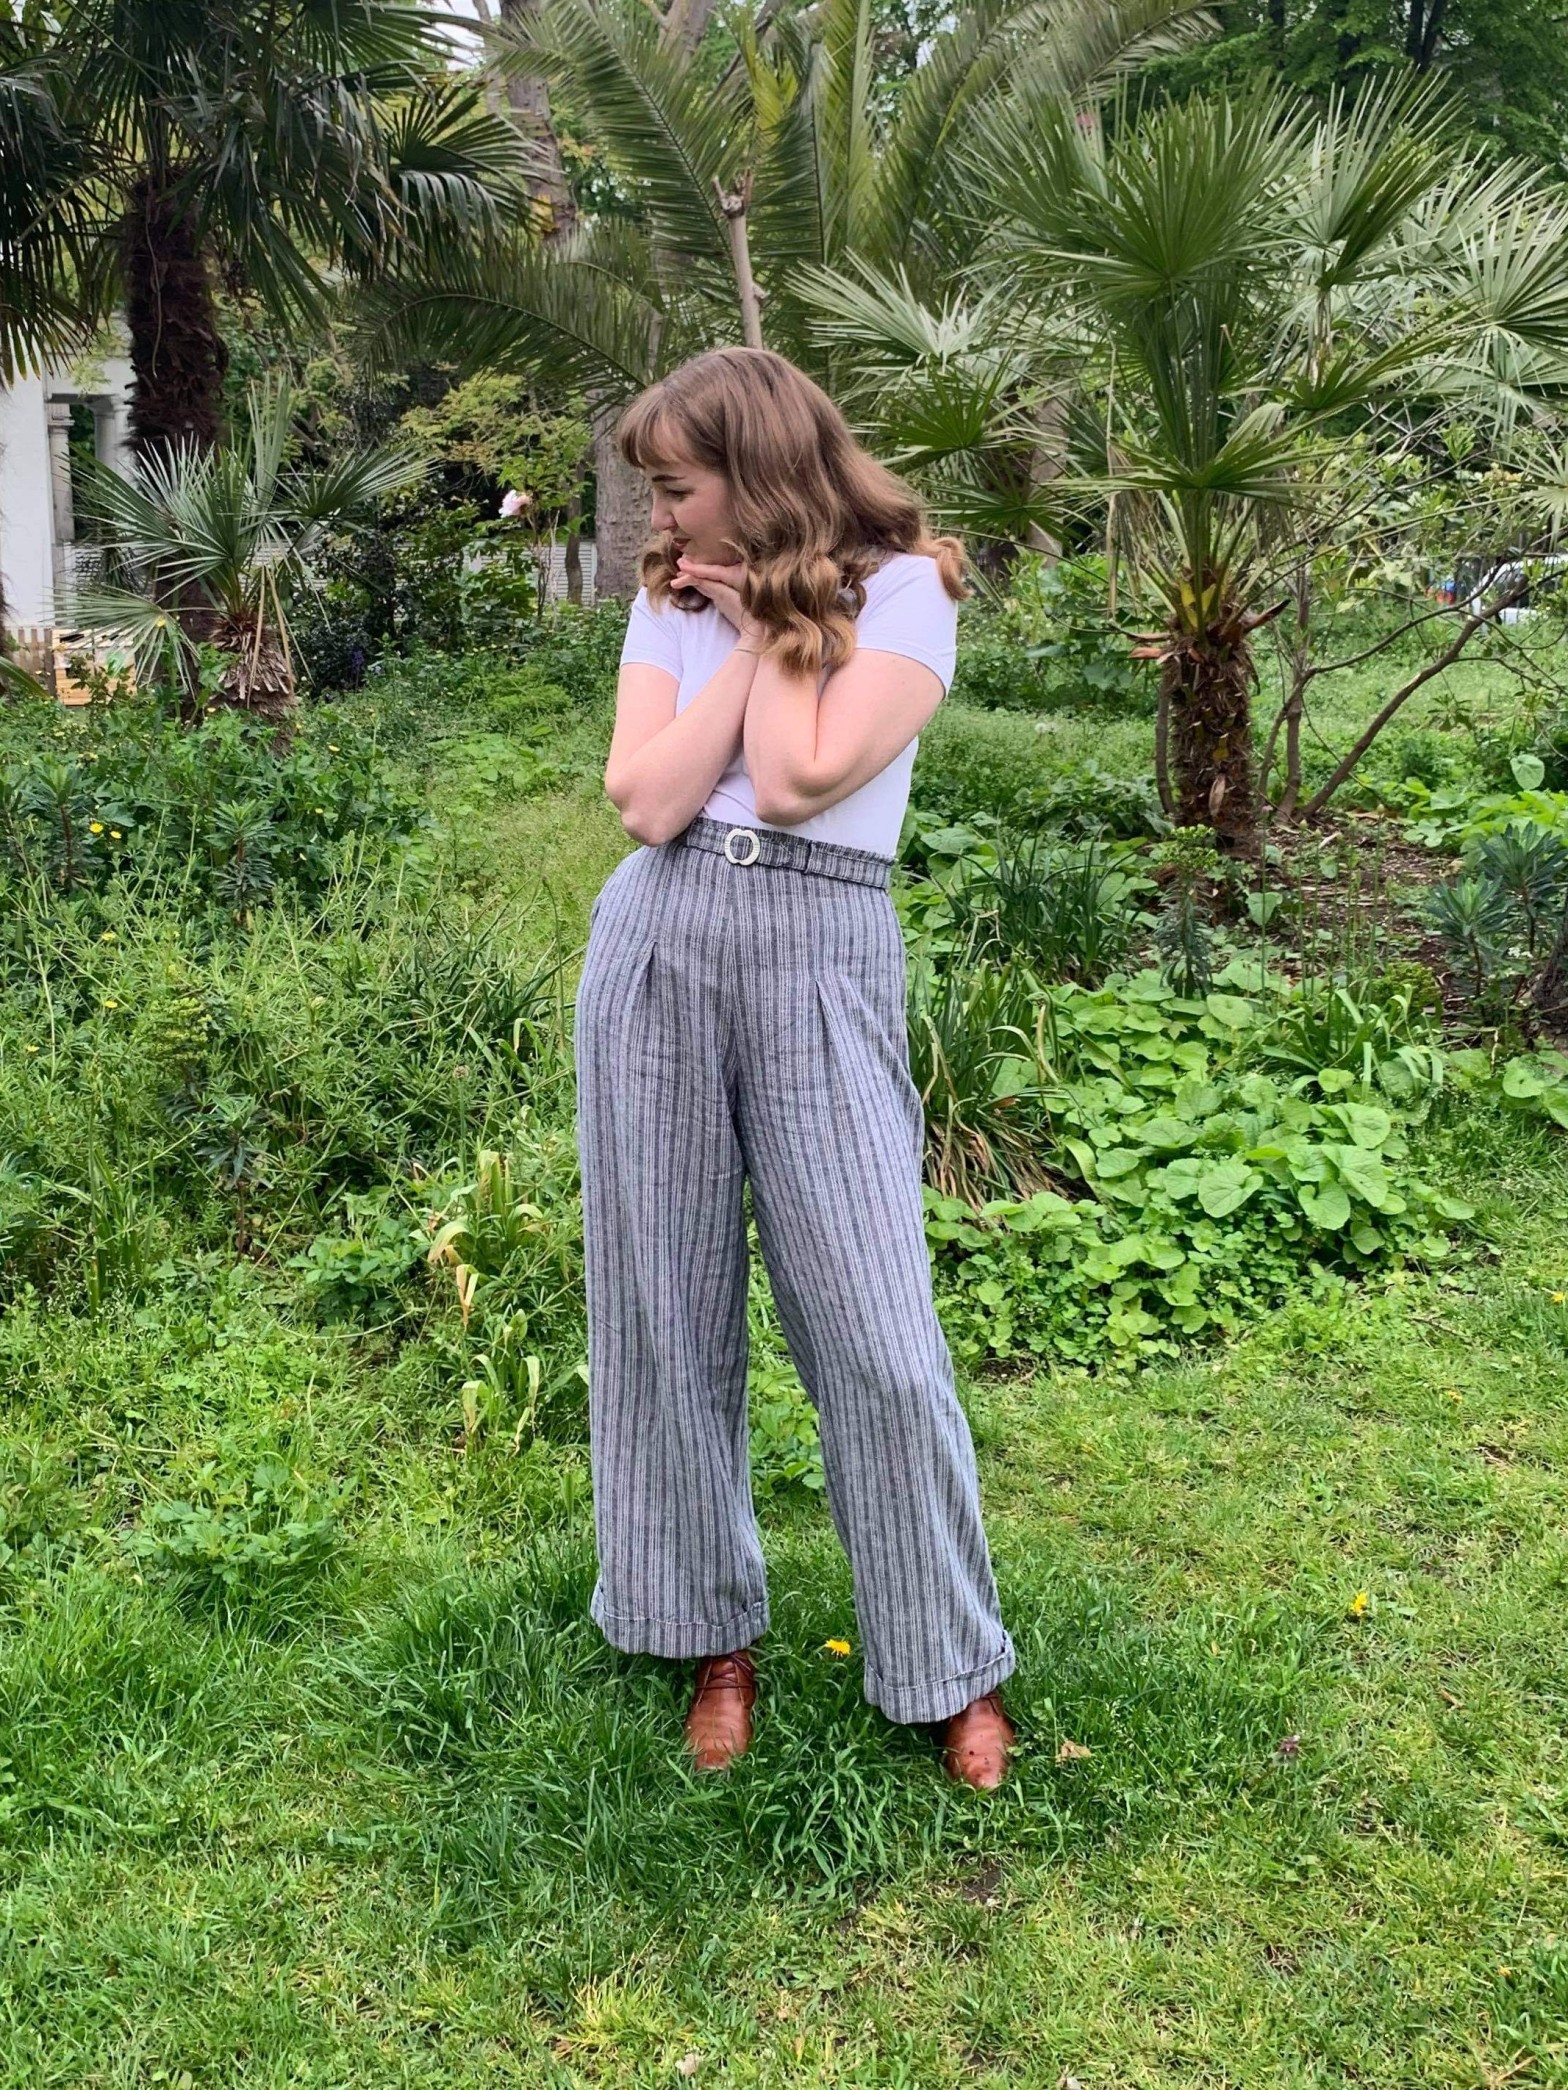 Wearing History Smooth Sailing trousers: making 1940s summer